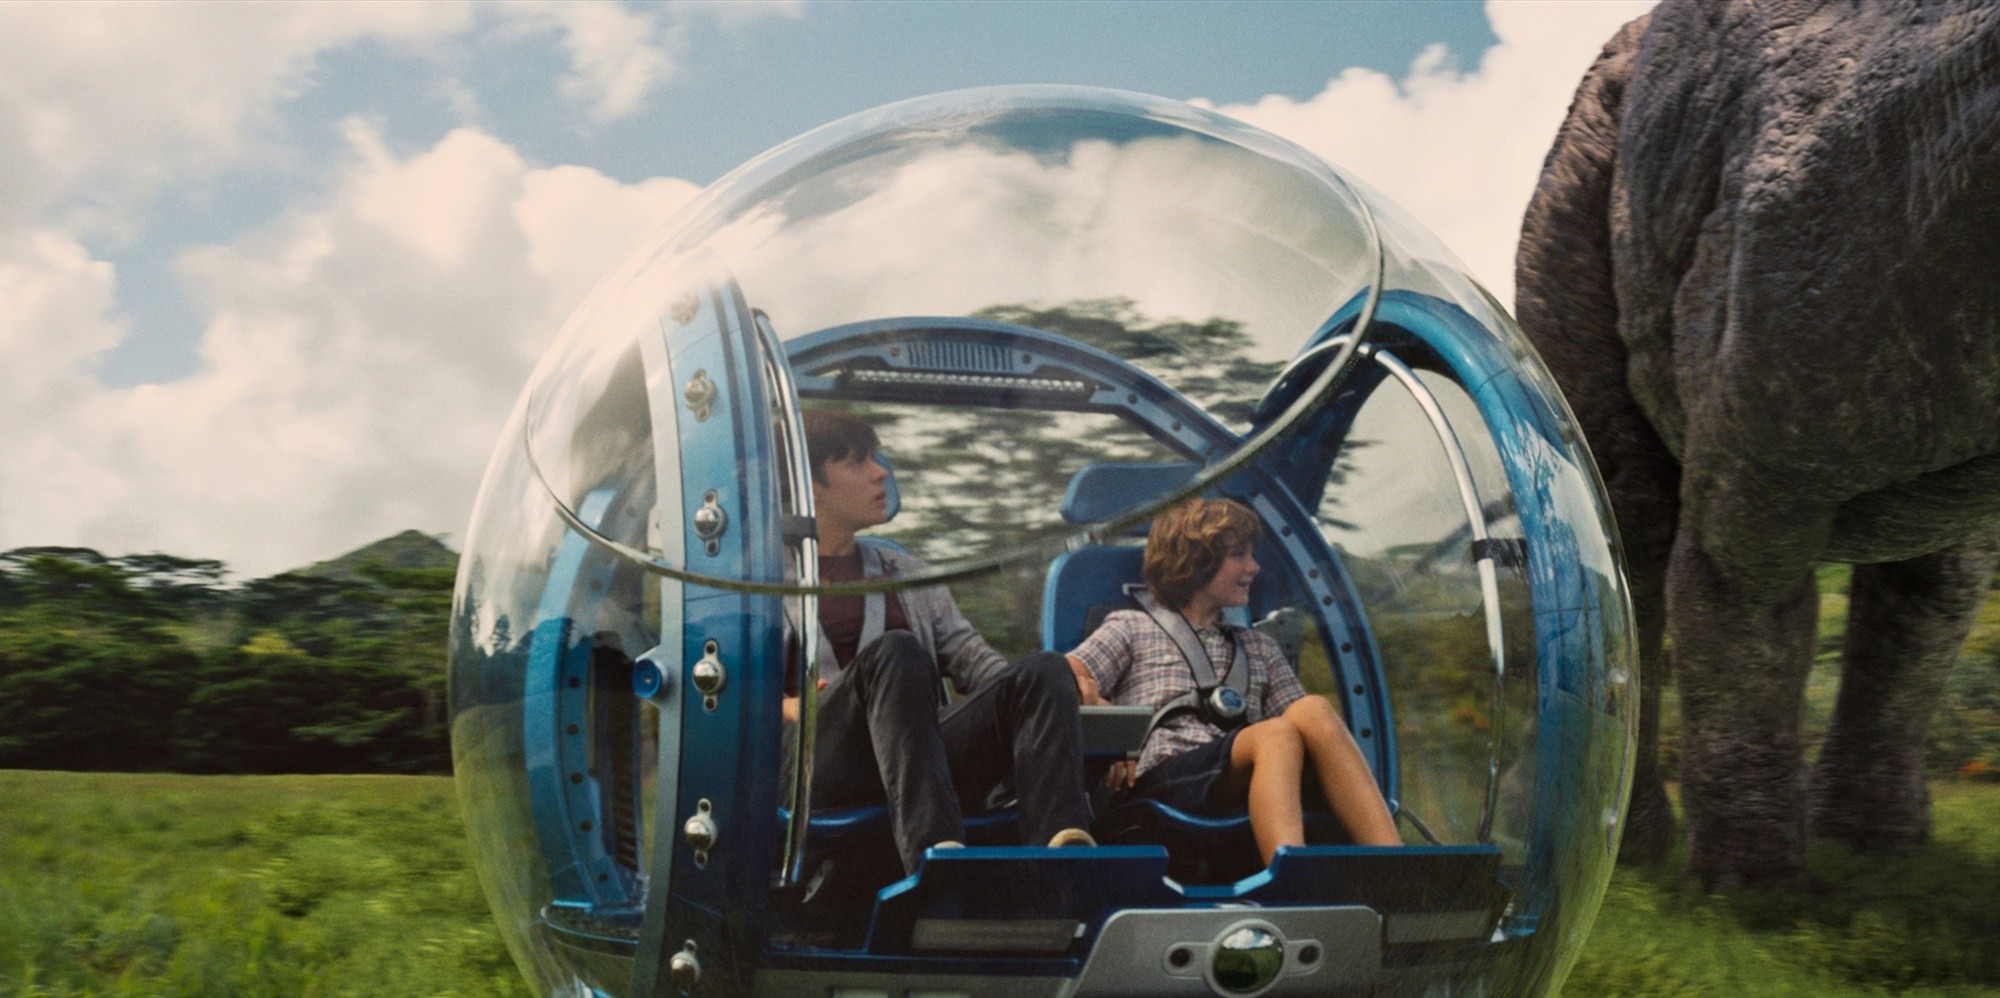 Nick Robinson stars as Zach and Ty Simpkins stars as Gray in Universal Pictures' Jurassic World (2015)